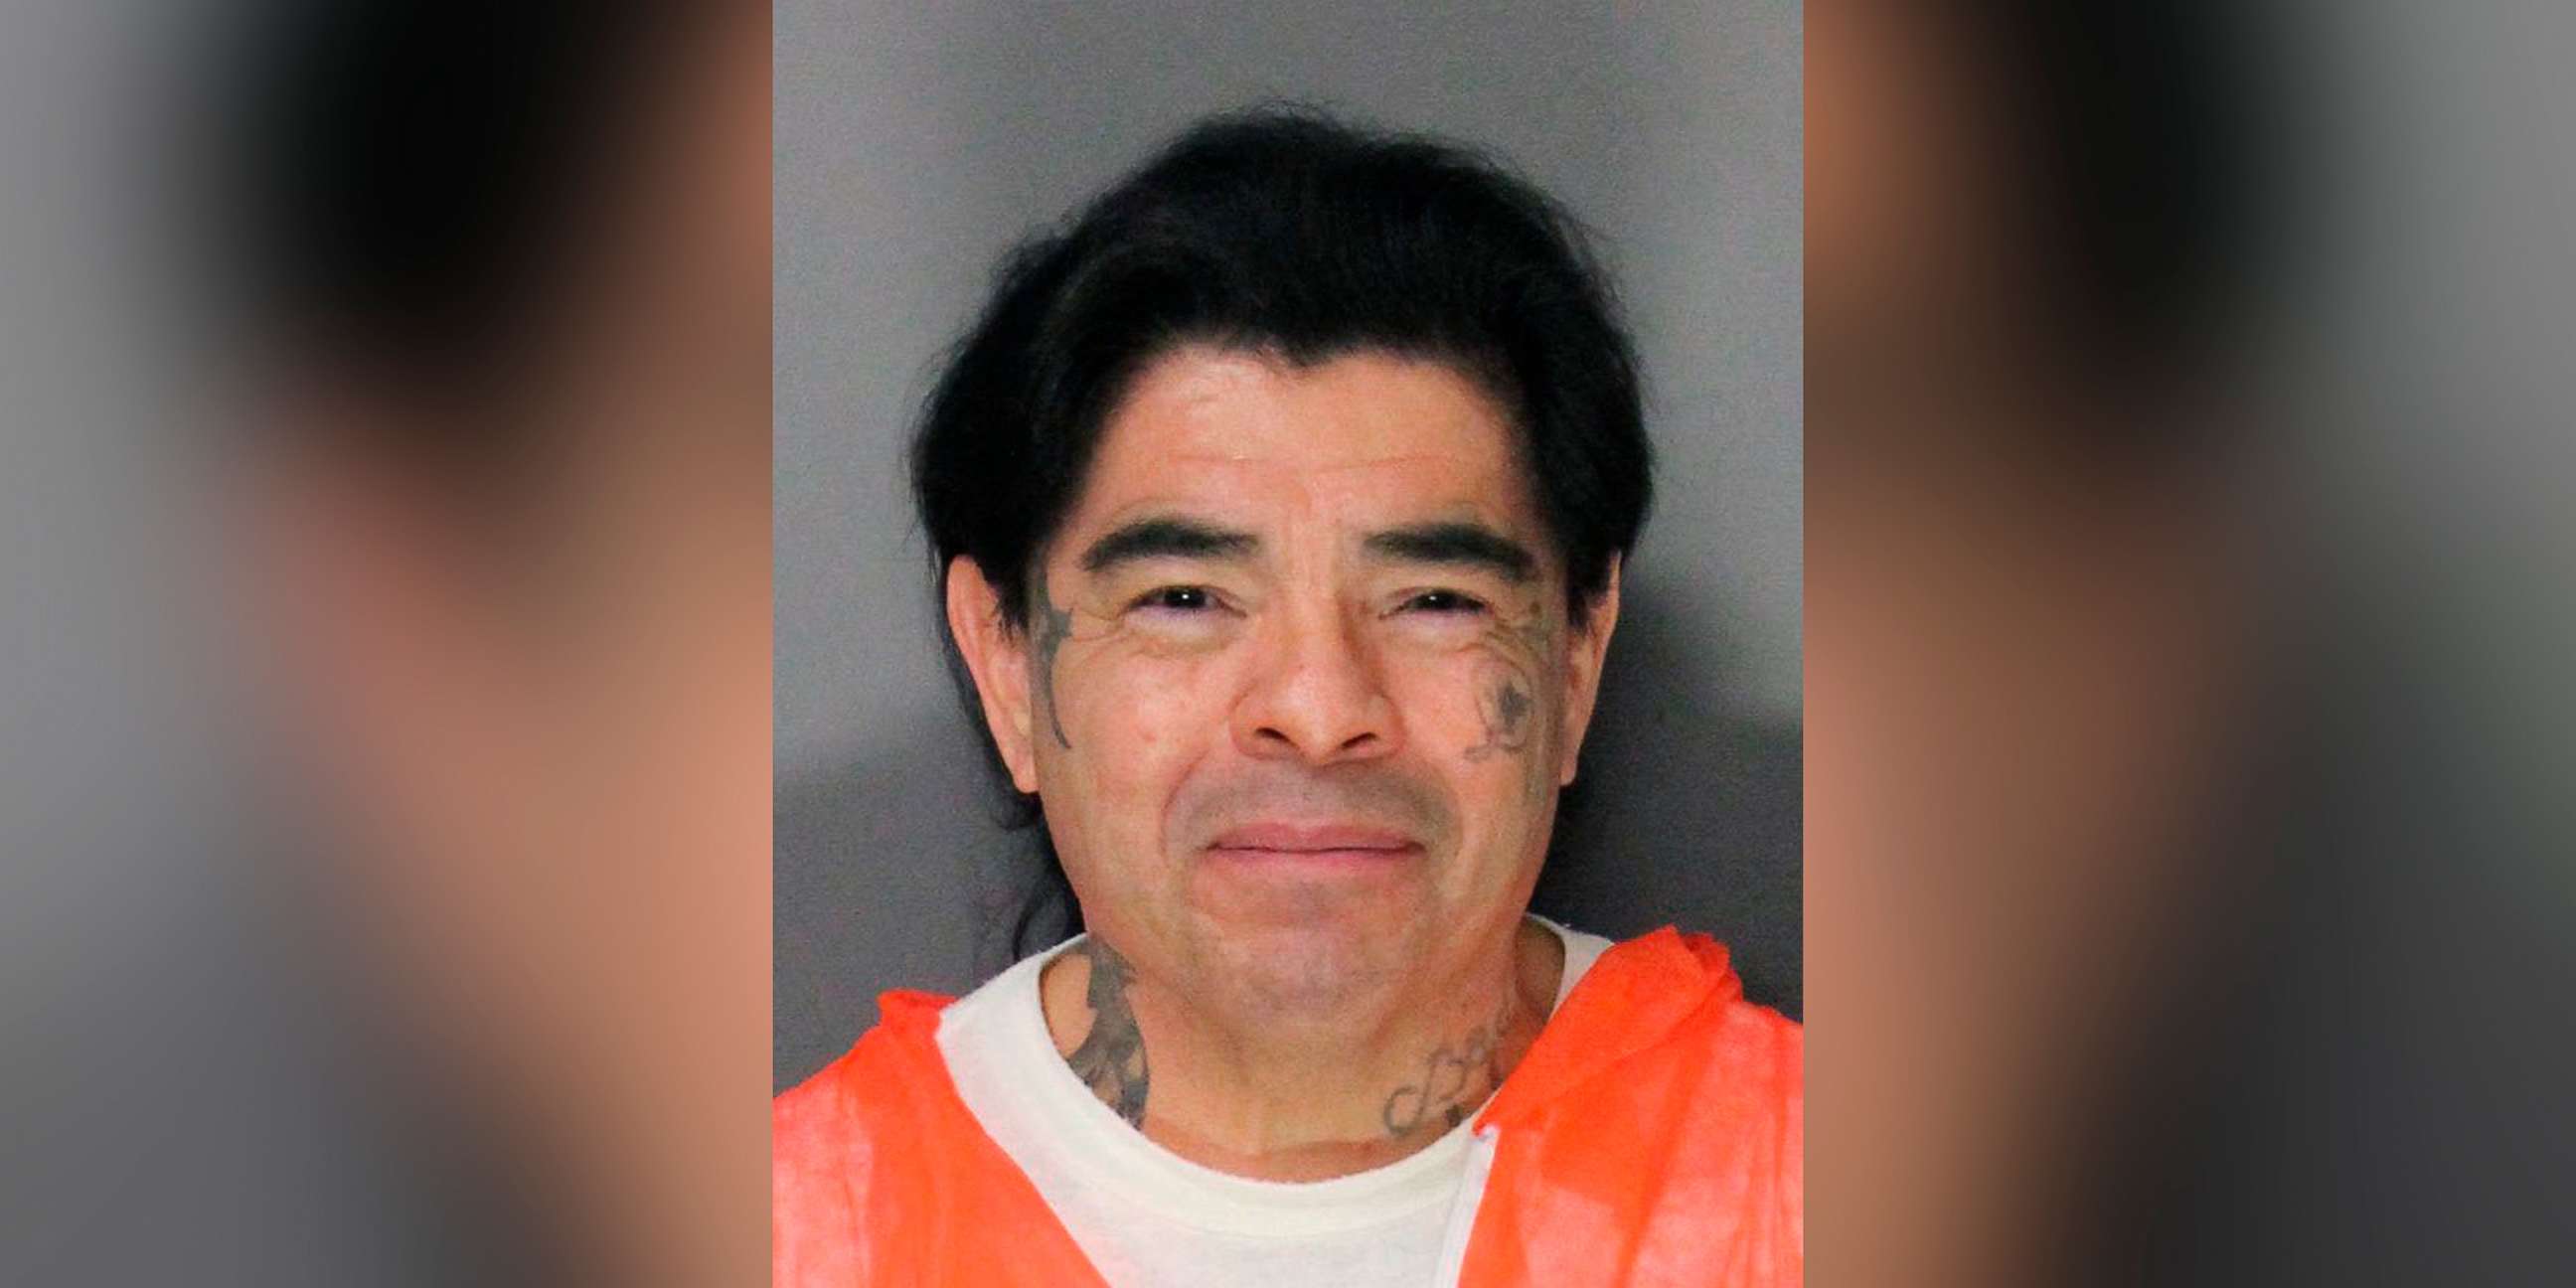 PHOTO: An undated booking photo shows Paul Perez. The 57-year-old California man has been arrested in the decades-old killings of five of his infant children, a case the sheriff said had haunted his agency for years, Jan. 27, 2020.